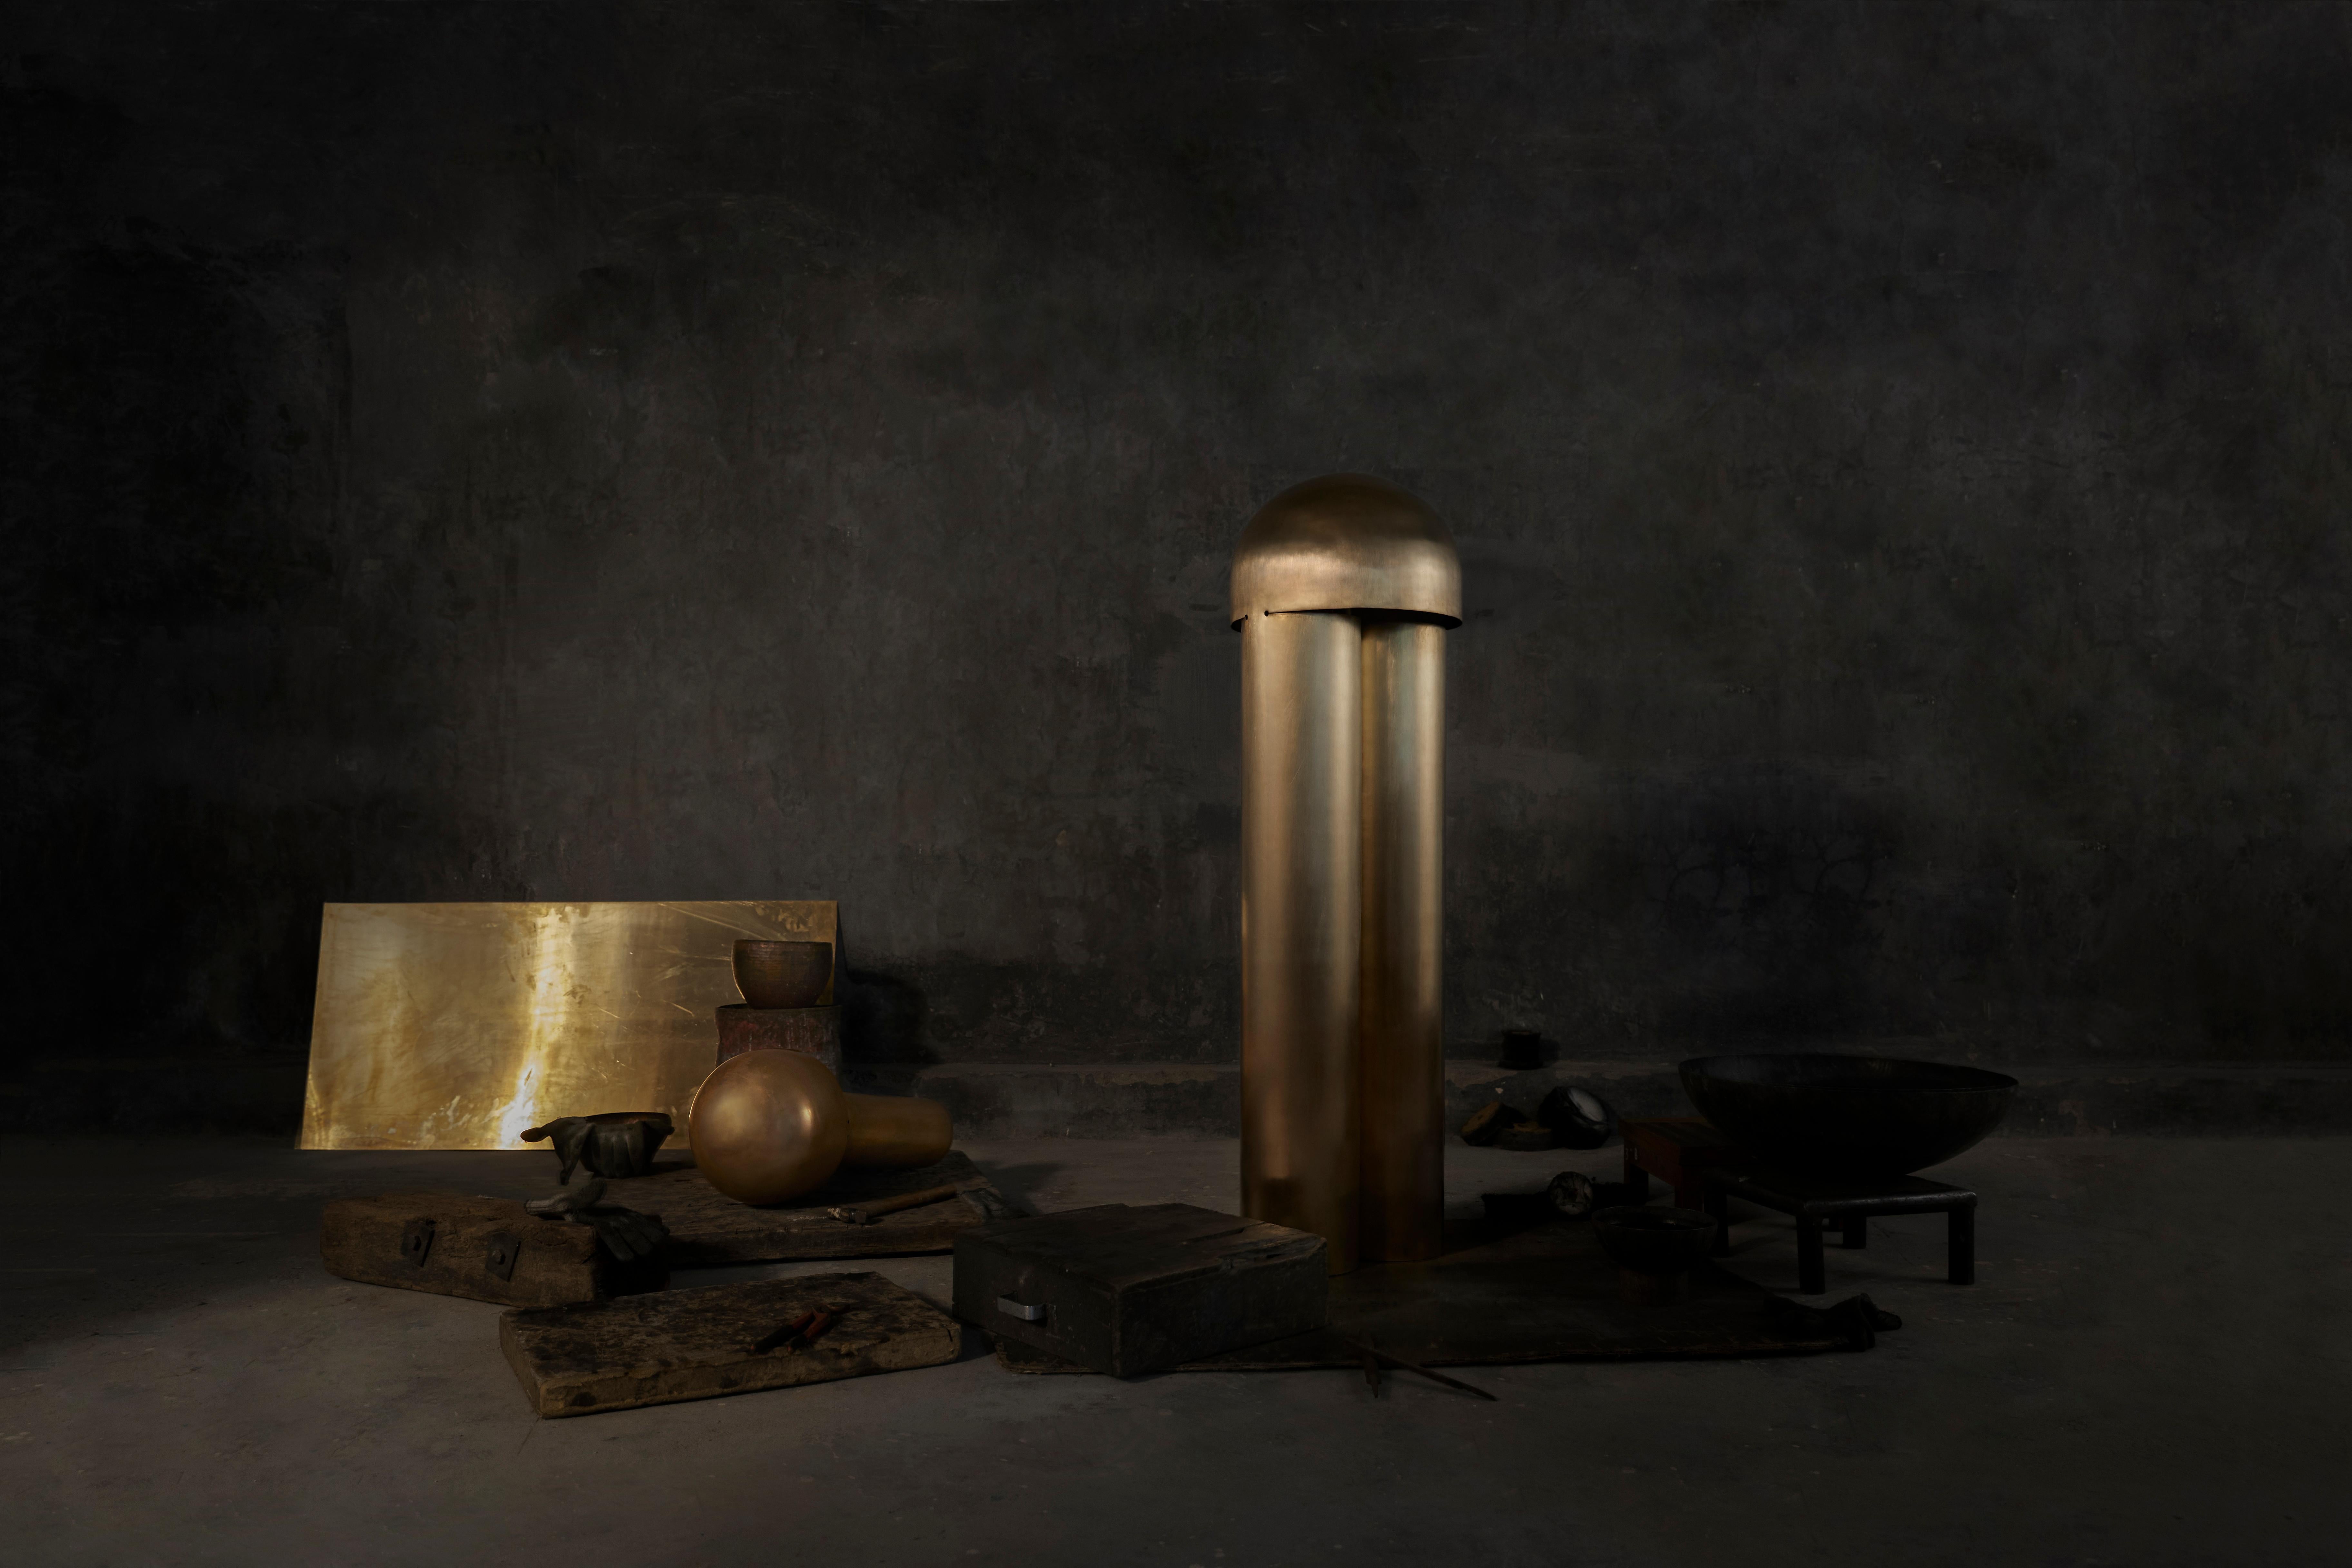 Monolith brass sculpted floor lamp by Paul Matter
Measures: H 147.3 x D 38 cm
Weight: 3 Kgs
Lamping: 1 type E14 base, 3W–5W LED, warm white
CE certified, Voltage 220V-240V
Dimmable upon request
Materials: Brass

Custom finishes:
1. Aged